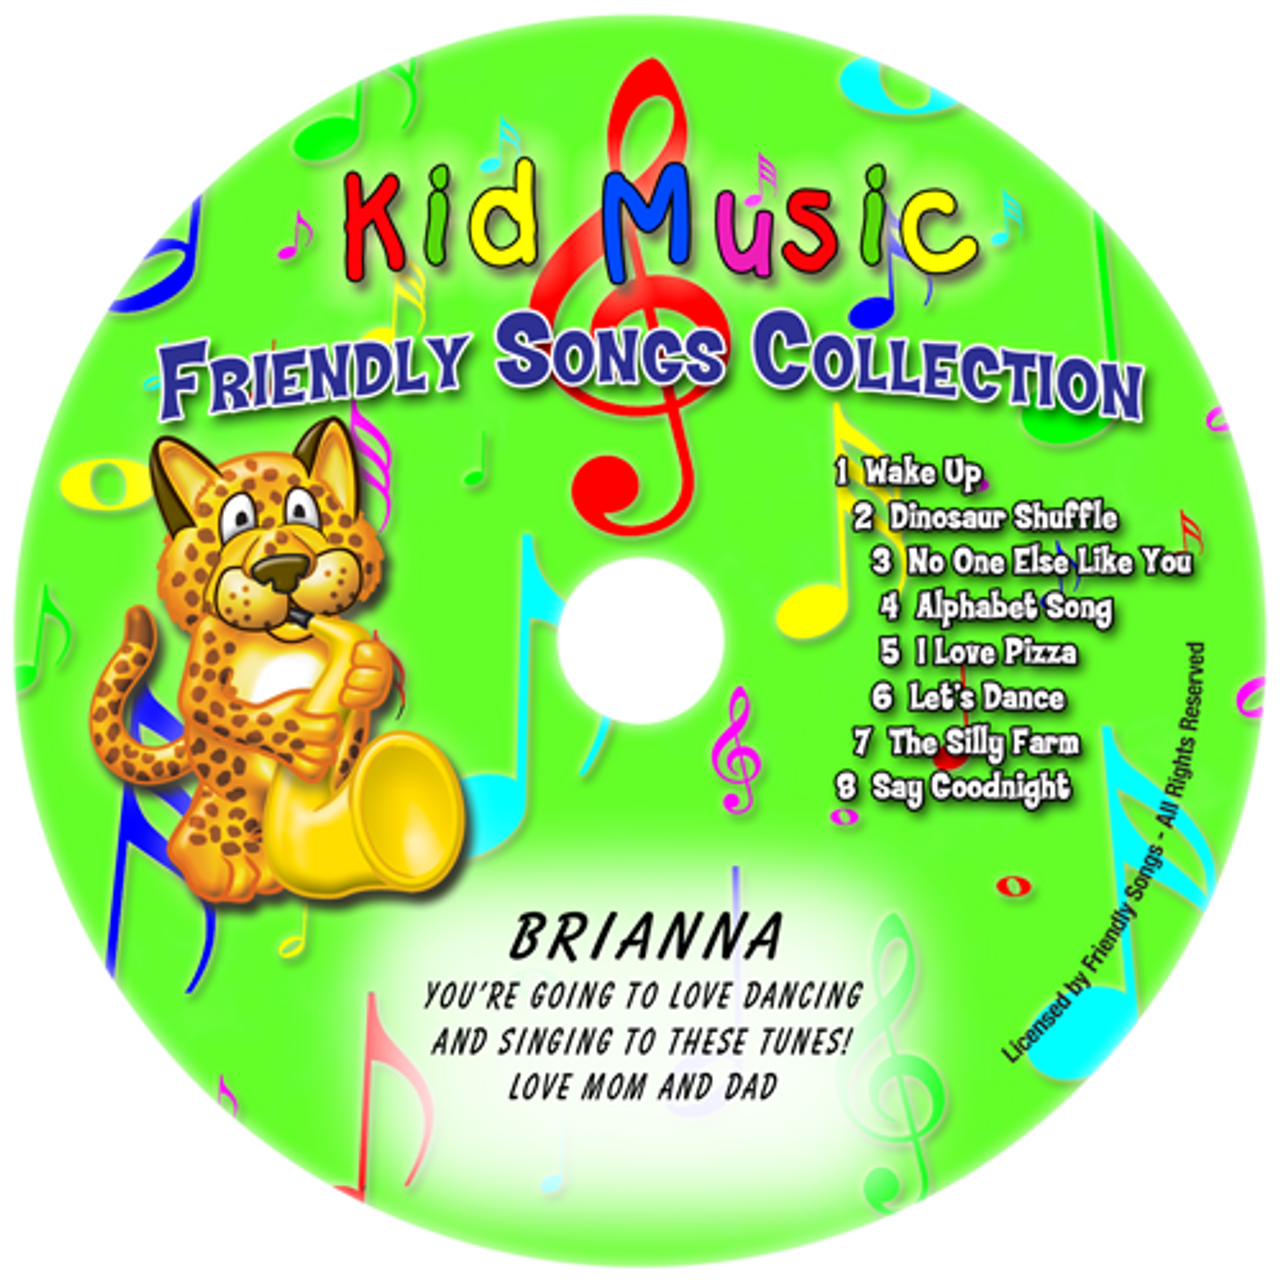 Friendly Songs Collection Personalized Kids Music CD